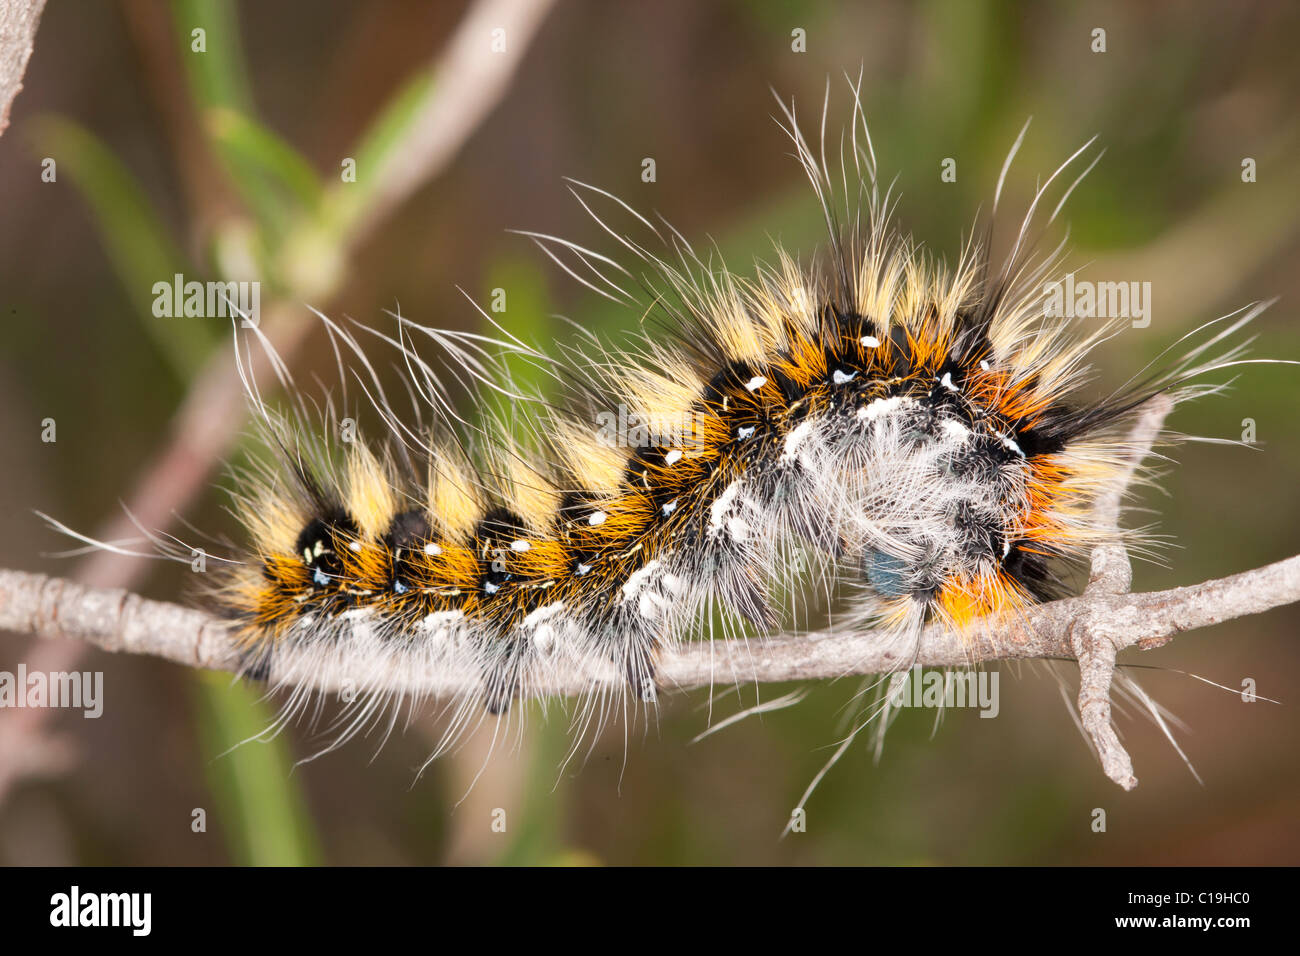 Close view detail of a lappet moth caterpillar on the vegetation. Stock Photo